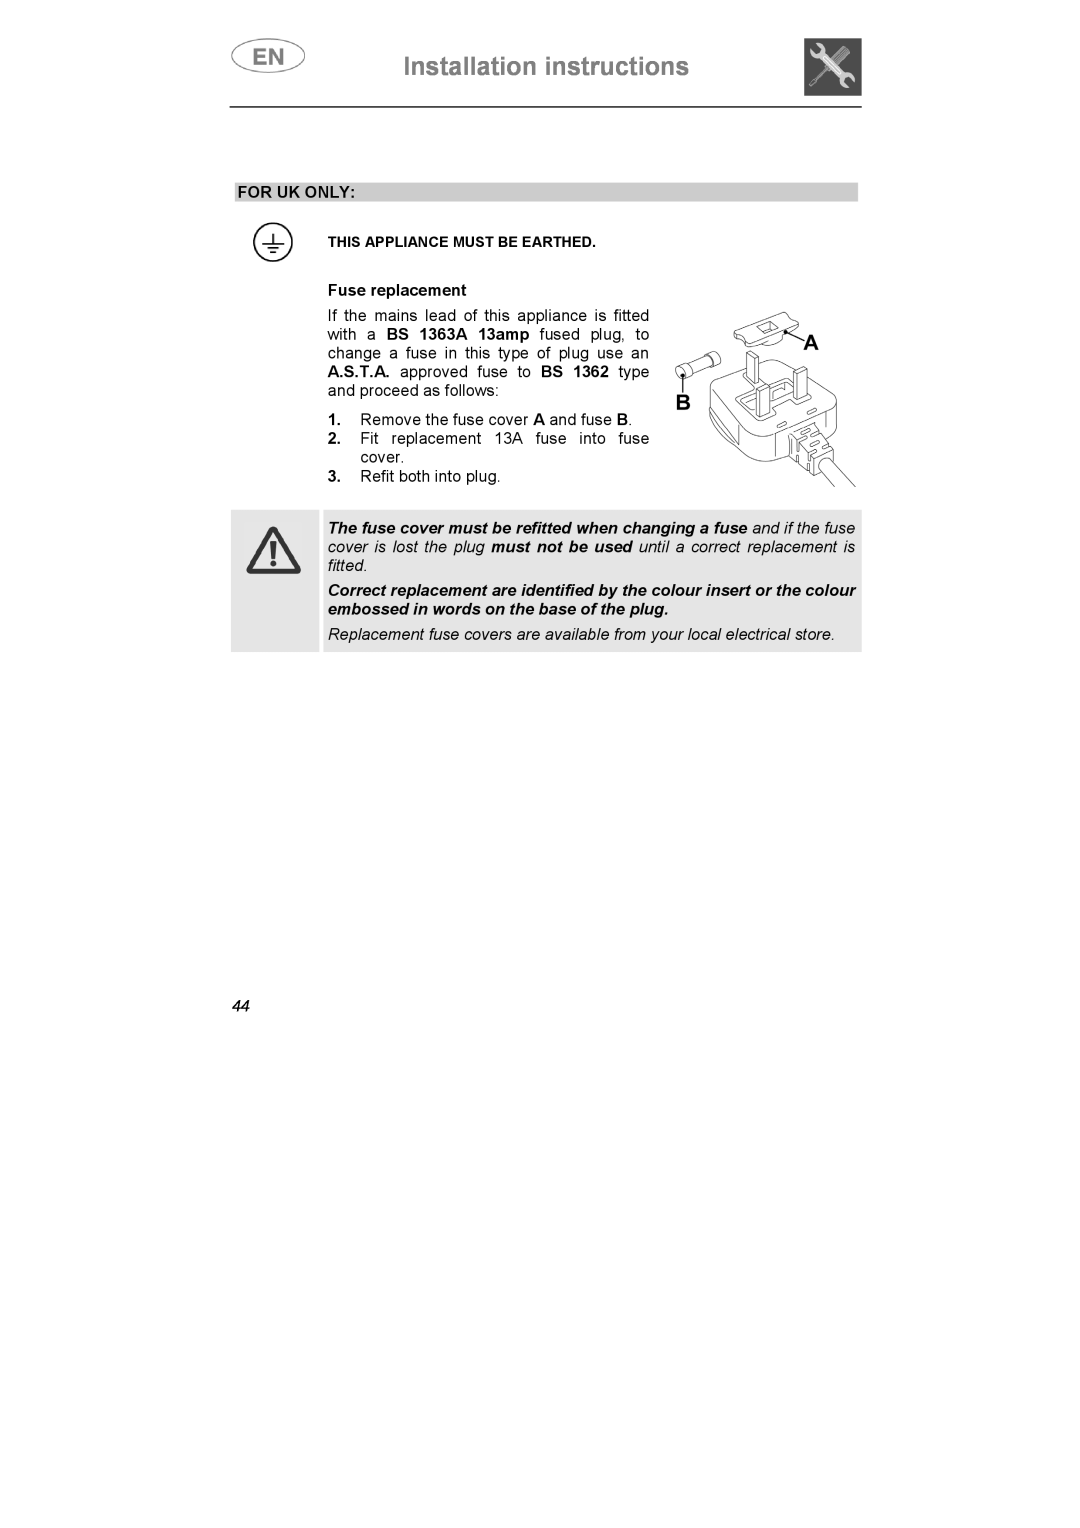 Smeg ST0904 instruction manual For Uk Only, Fuse replacement, Installation instructions 